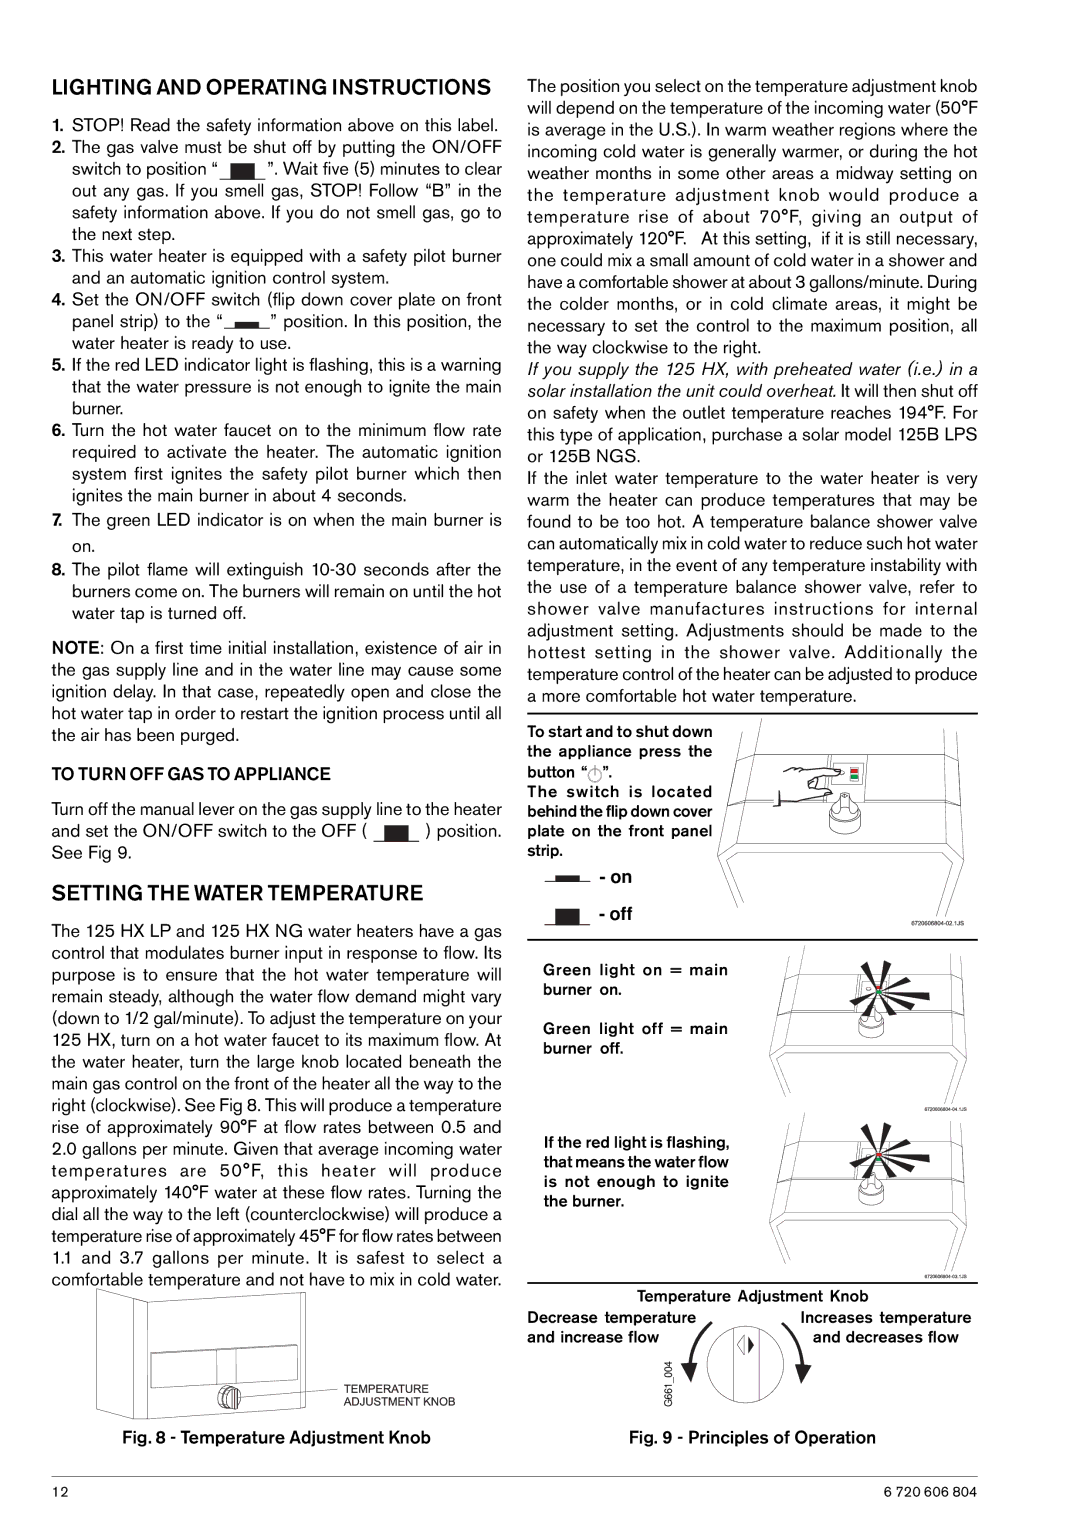 AquaStar 125HX LP Lighting and Operating Instructions, Setting the Water Temperature, To Turn OFF GAS to Appliance 